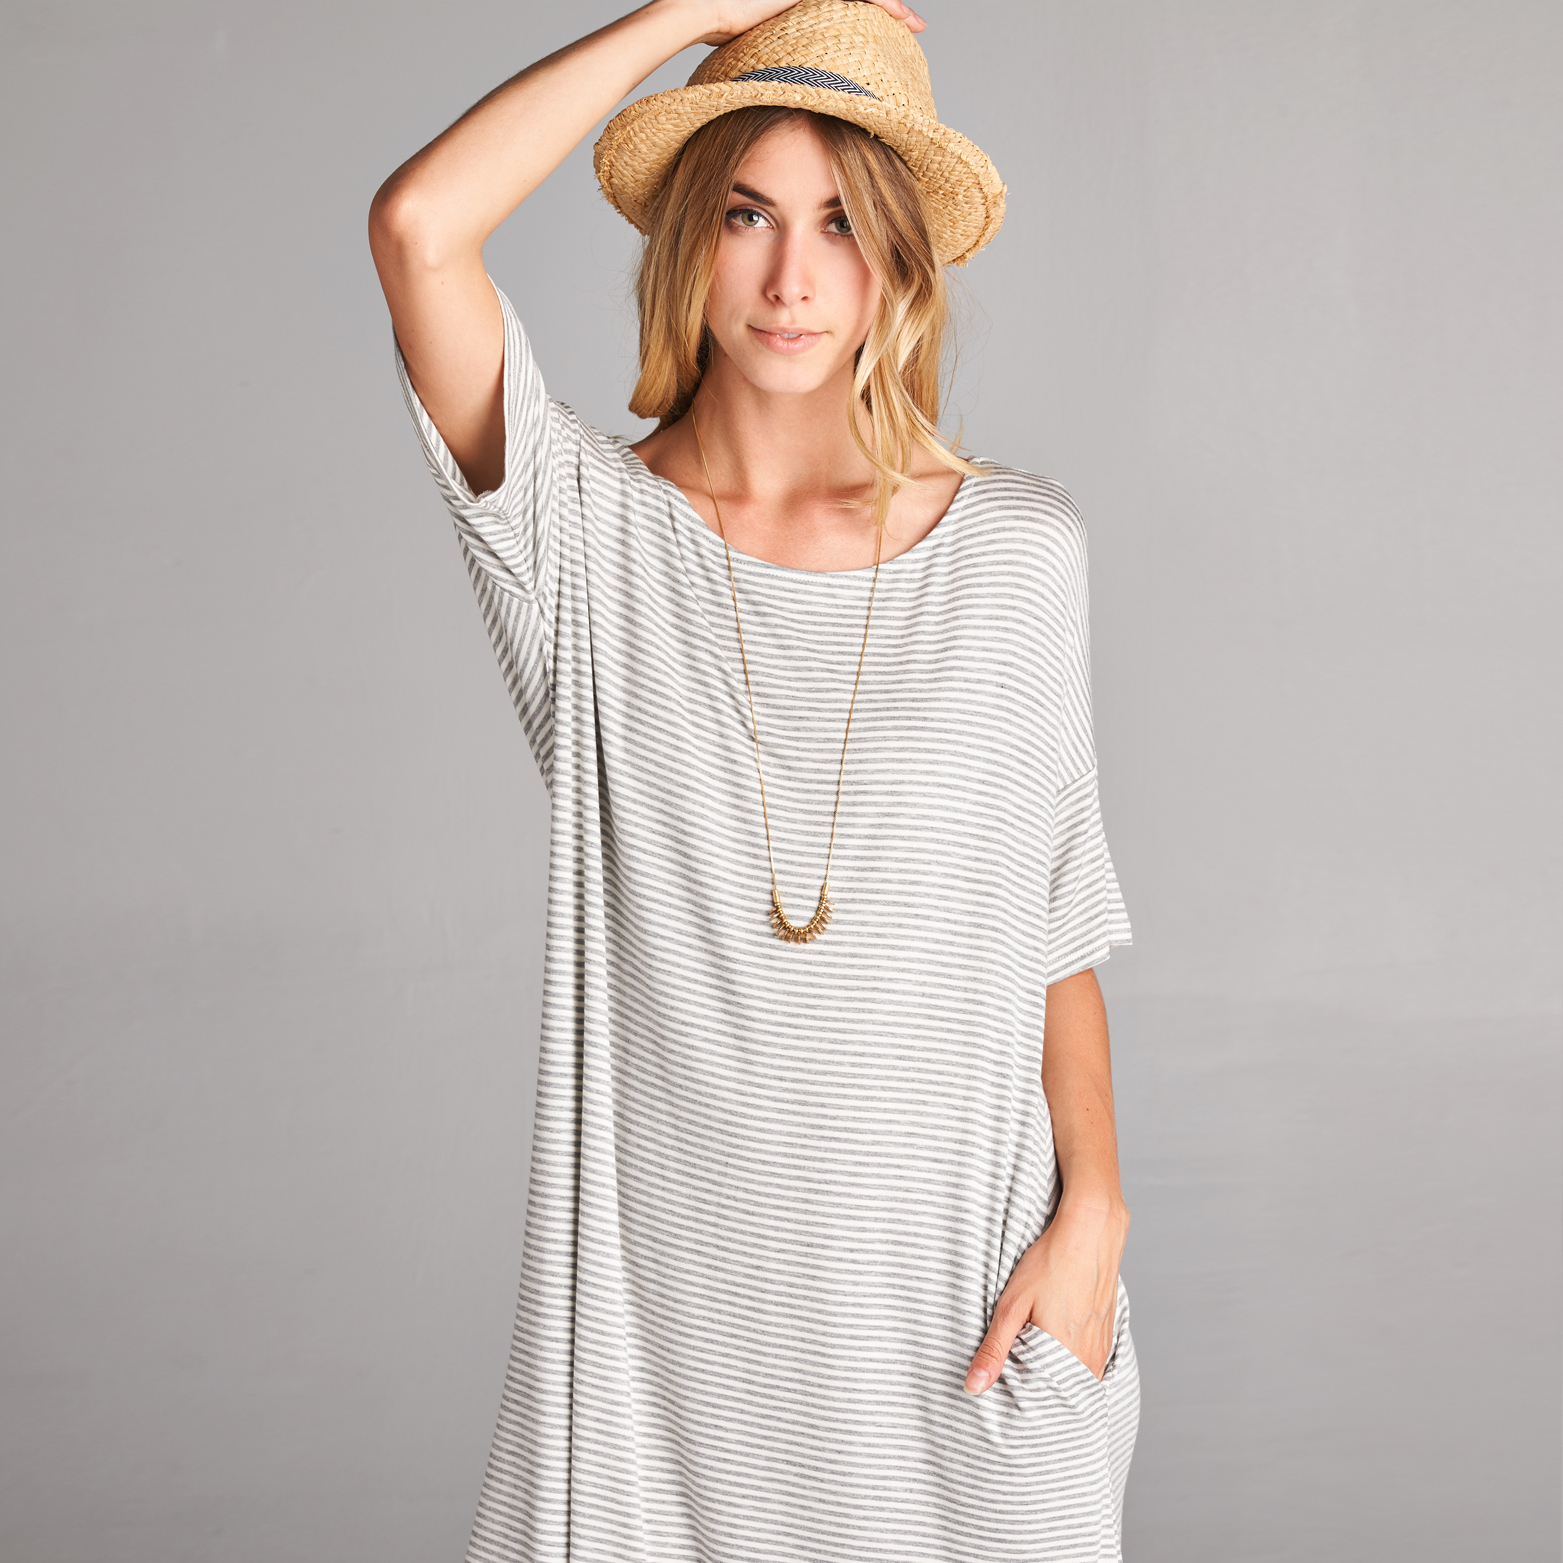 Relaxed Fit Pocket Dress - Grey/White Stripe, Large (14-16)